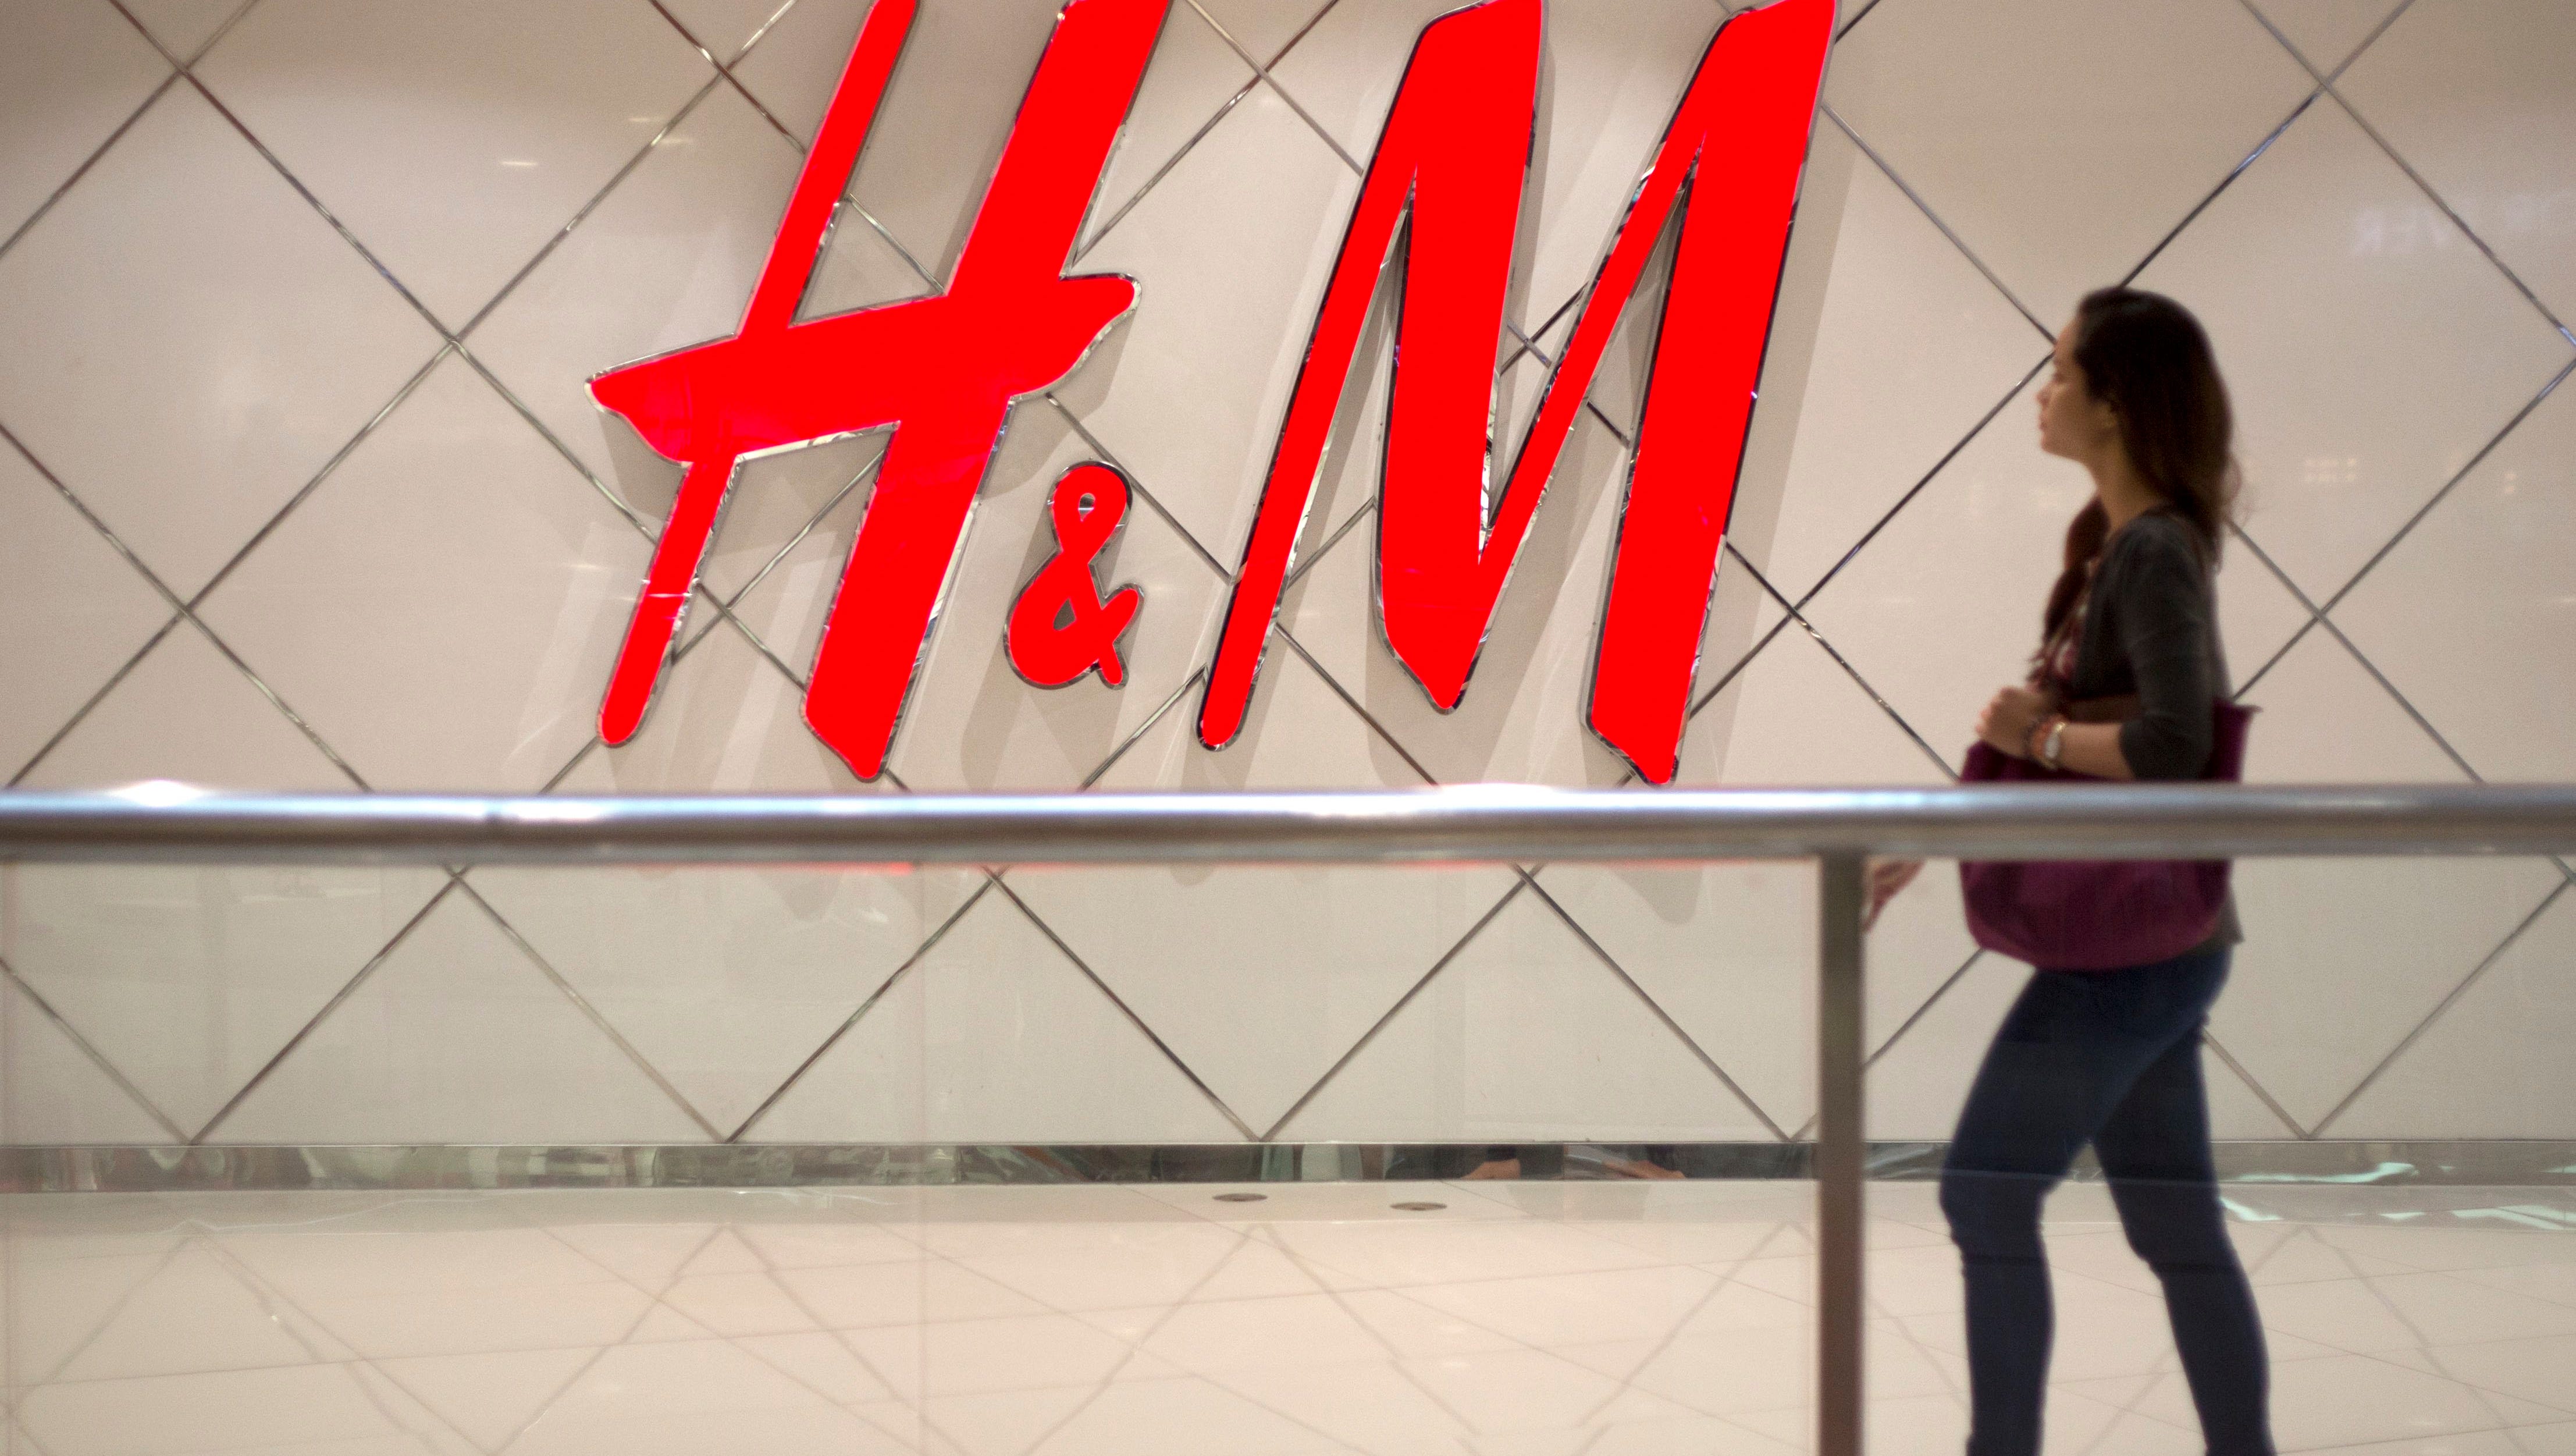 Earnings: HM shares fall amid trouble adapting to online shopping